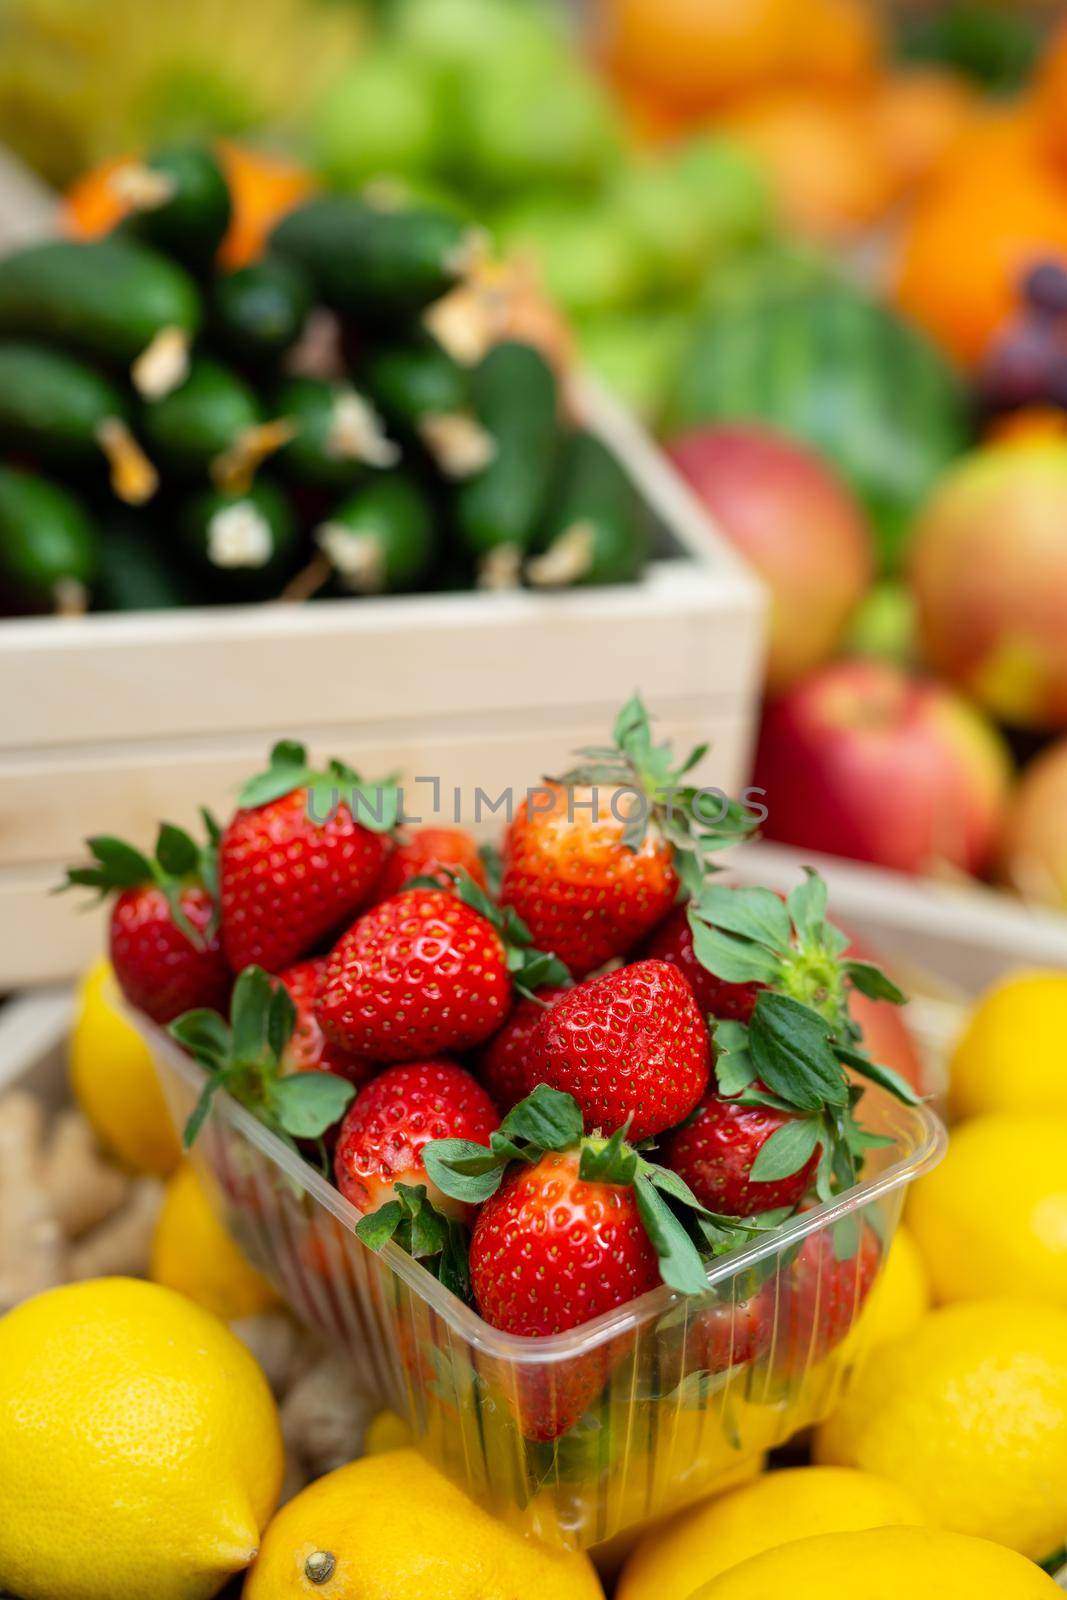 Tray of strawberries on the counter of a vegetable store among vegetables and fruits.